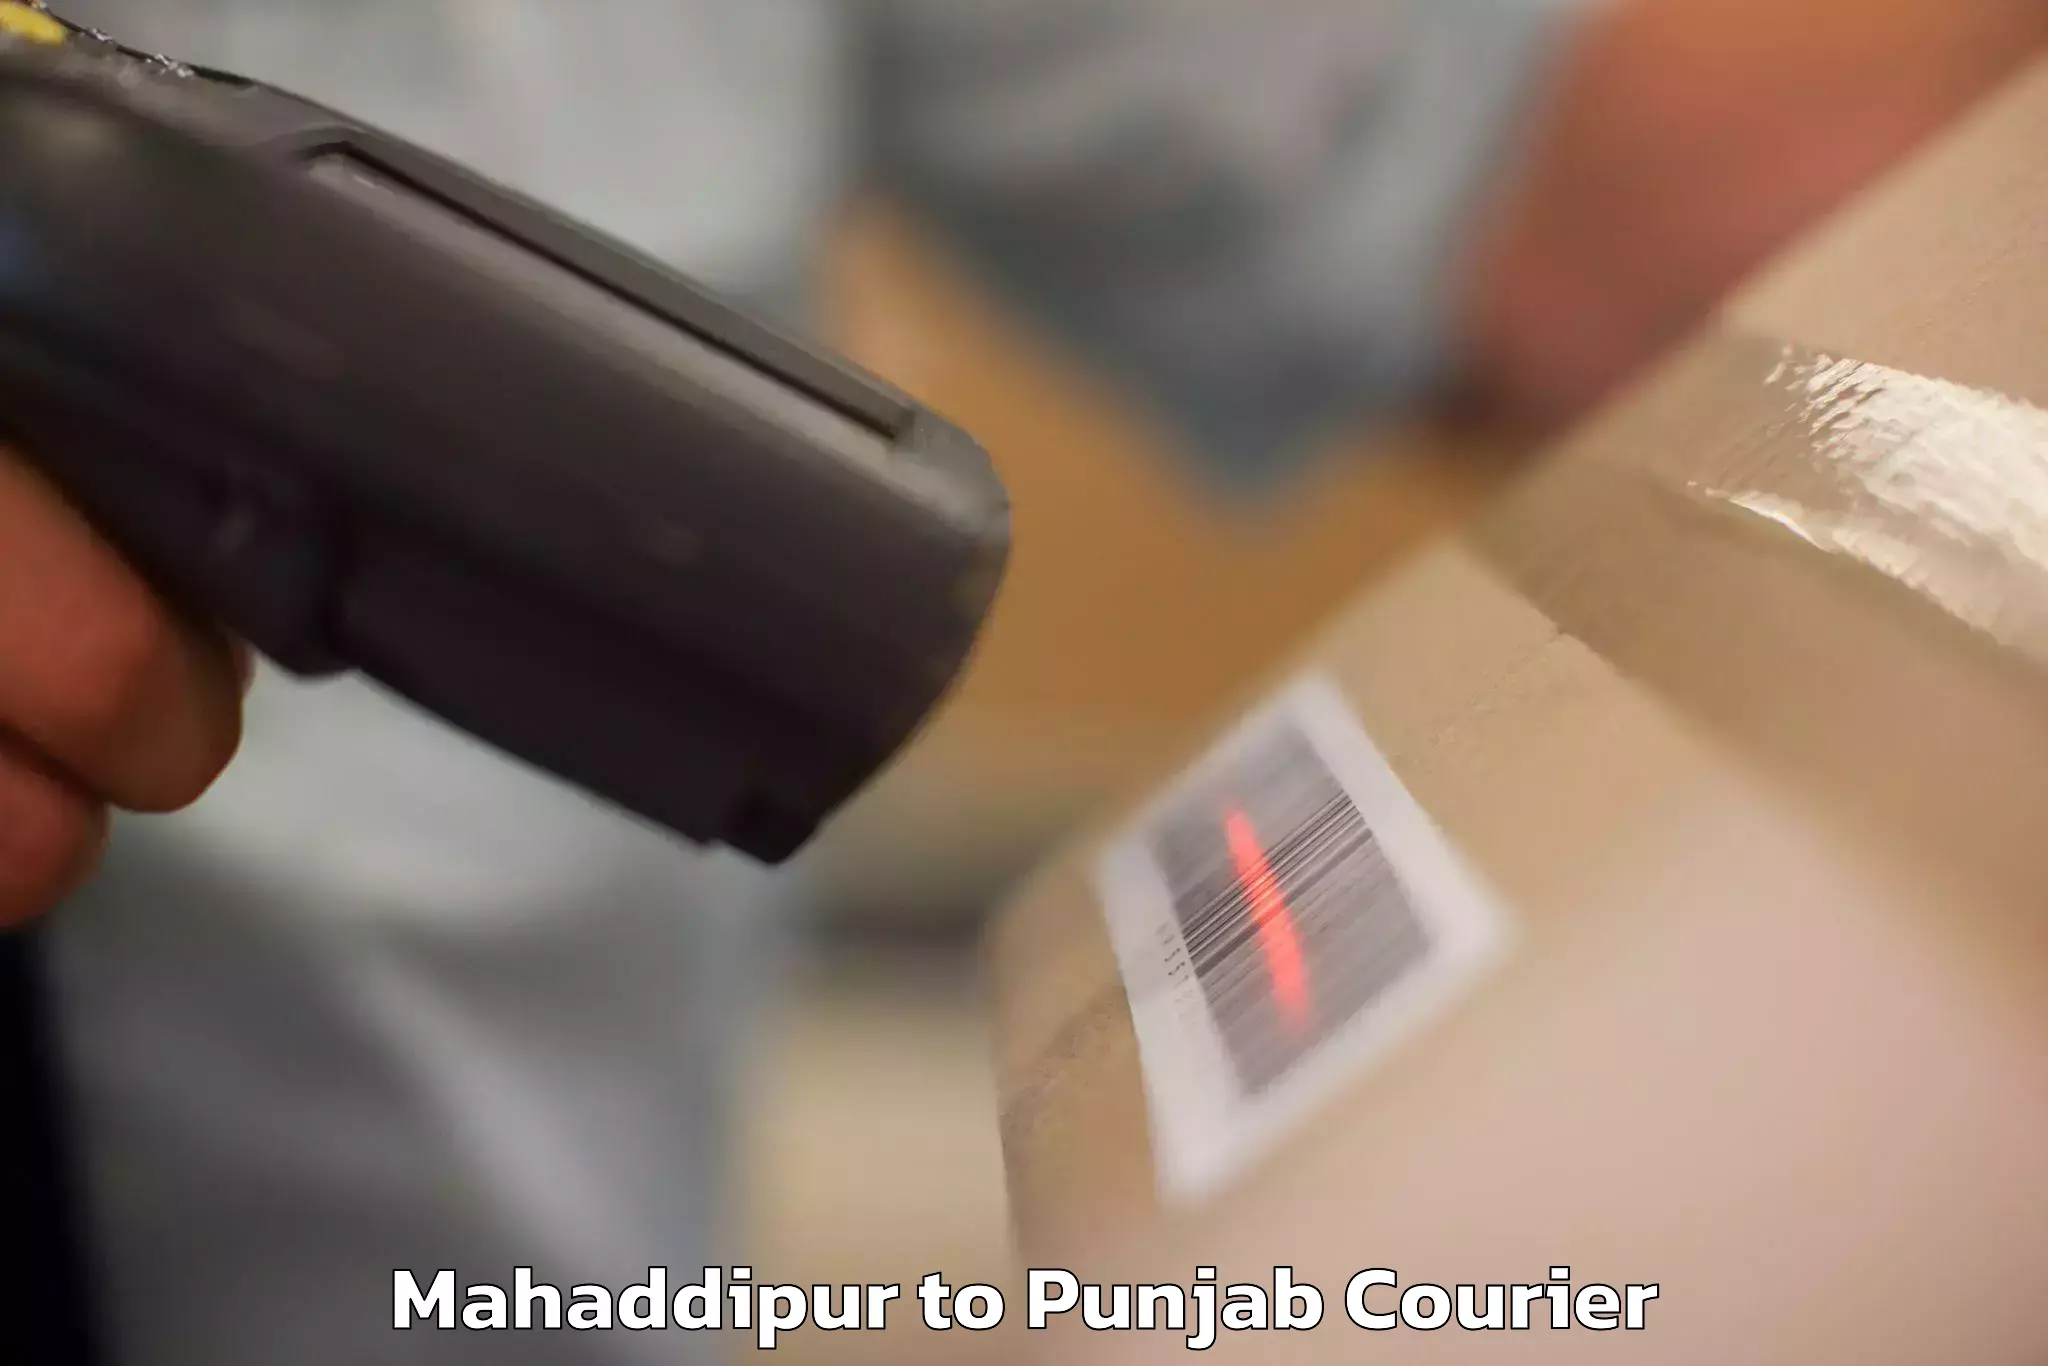 Group luggage shipping in Mahaddipur to Firozpur